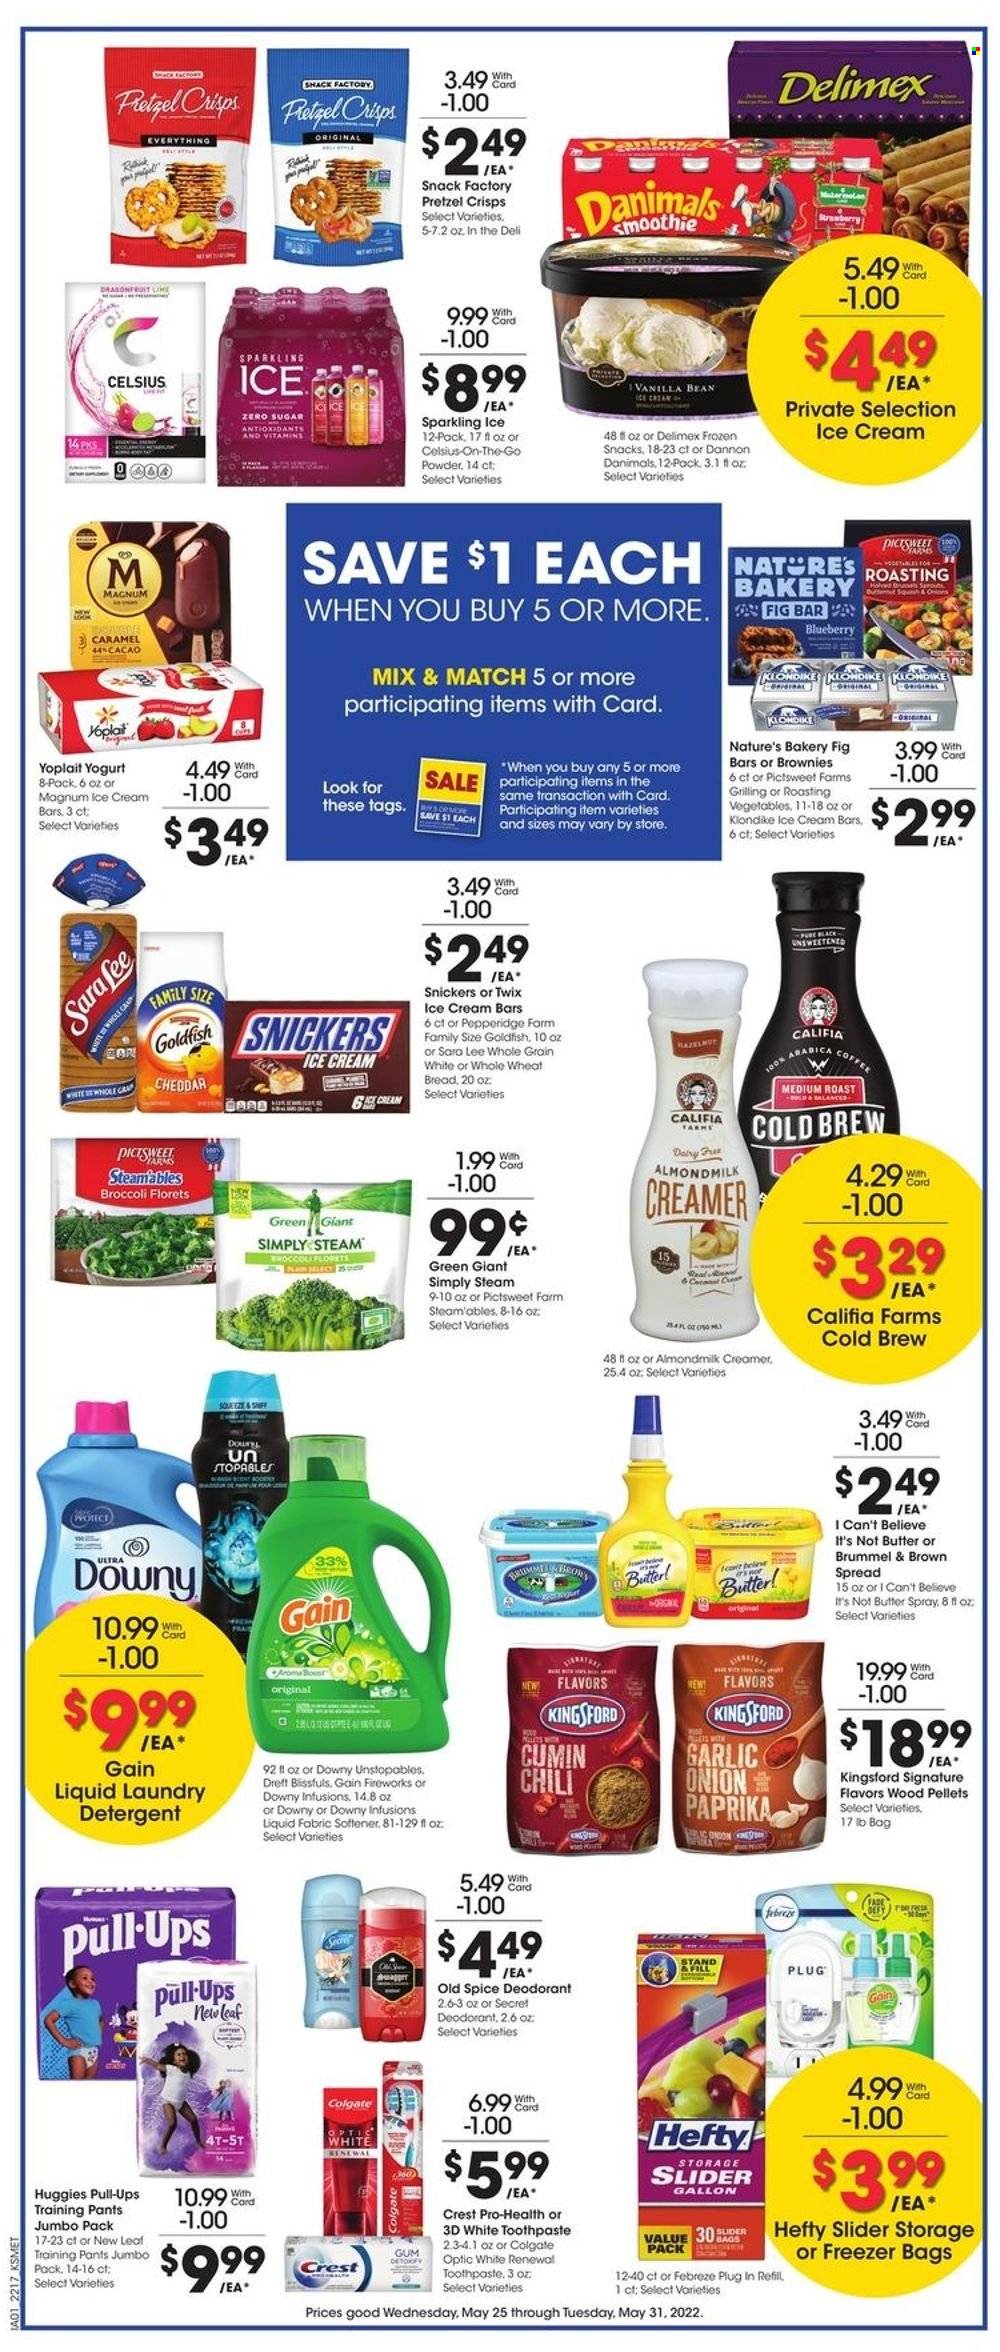 thumbnail - King Soopers Flyer - 05/25/2022 - 05/31/2022 - Sales products - wheat bread, Sara Lee, brownies, broccoli, garlic, onion, cheese, yoghurt, Yoplait, Dannon, Danimals, almond milk, butter, I Can't Believe It's Not Butter, creamer, ice cream, ice cream bars, snack, Snickers, Twix, Goldfish, pretzel crisps, spice, cumin, Boost, coffee, Huggies, pants, baby pants, detergent, Febreze, Gain, Unstopables, fabric softener, laundry detergent, Gain Fireworks, Downy Laundry, Old Spice, Colgate, toothpaste, Crest, anti-perspirant, deodorant, Hefty, freezer bag, freezer, Kingsford. Page 4.